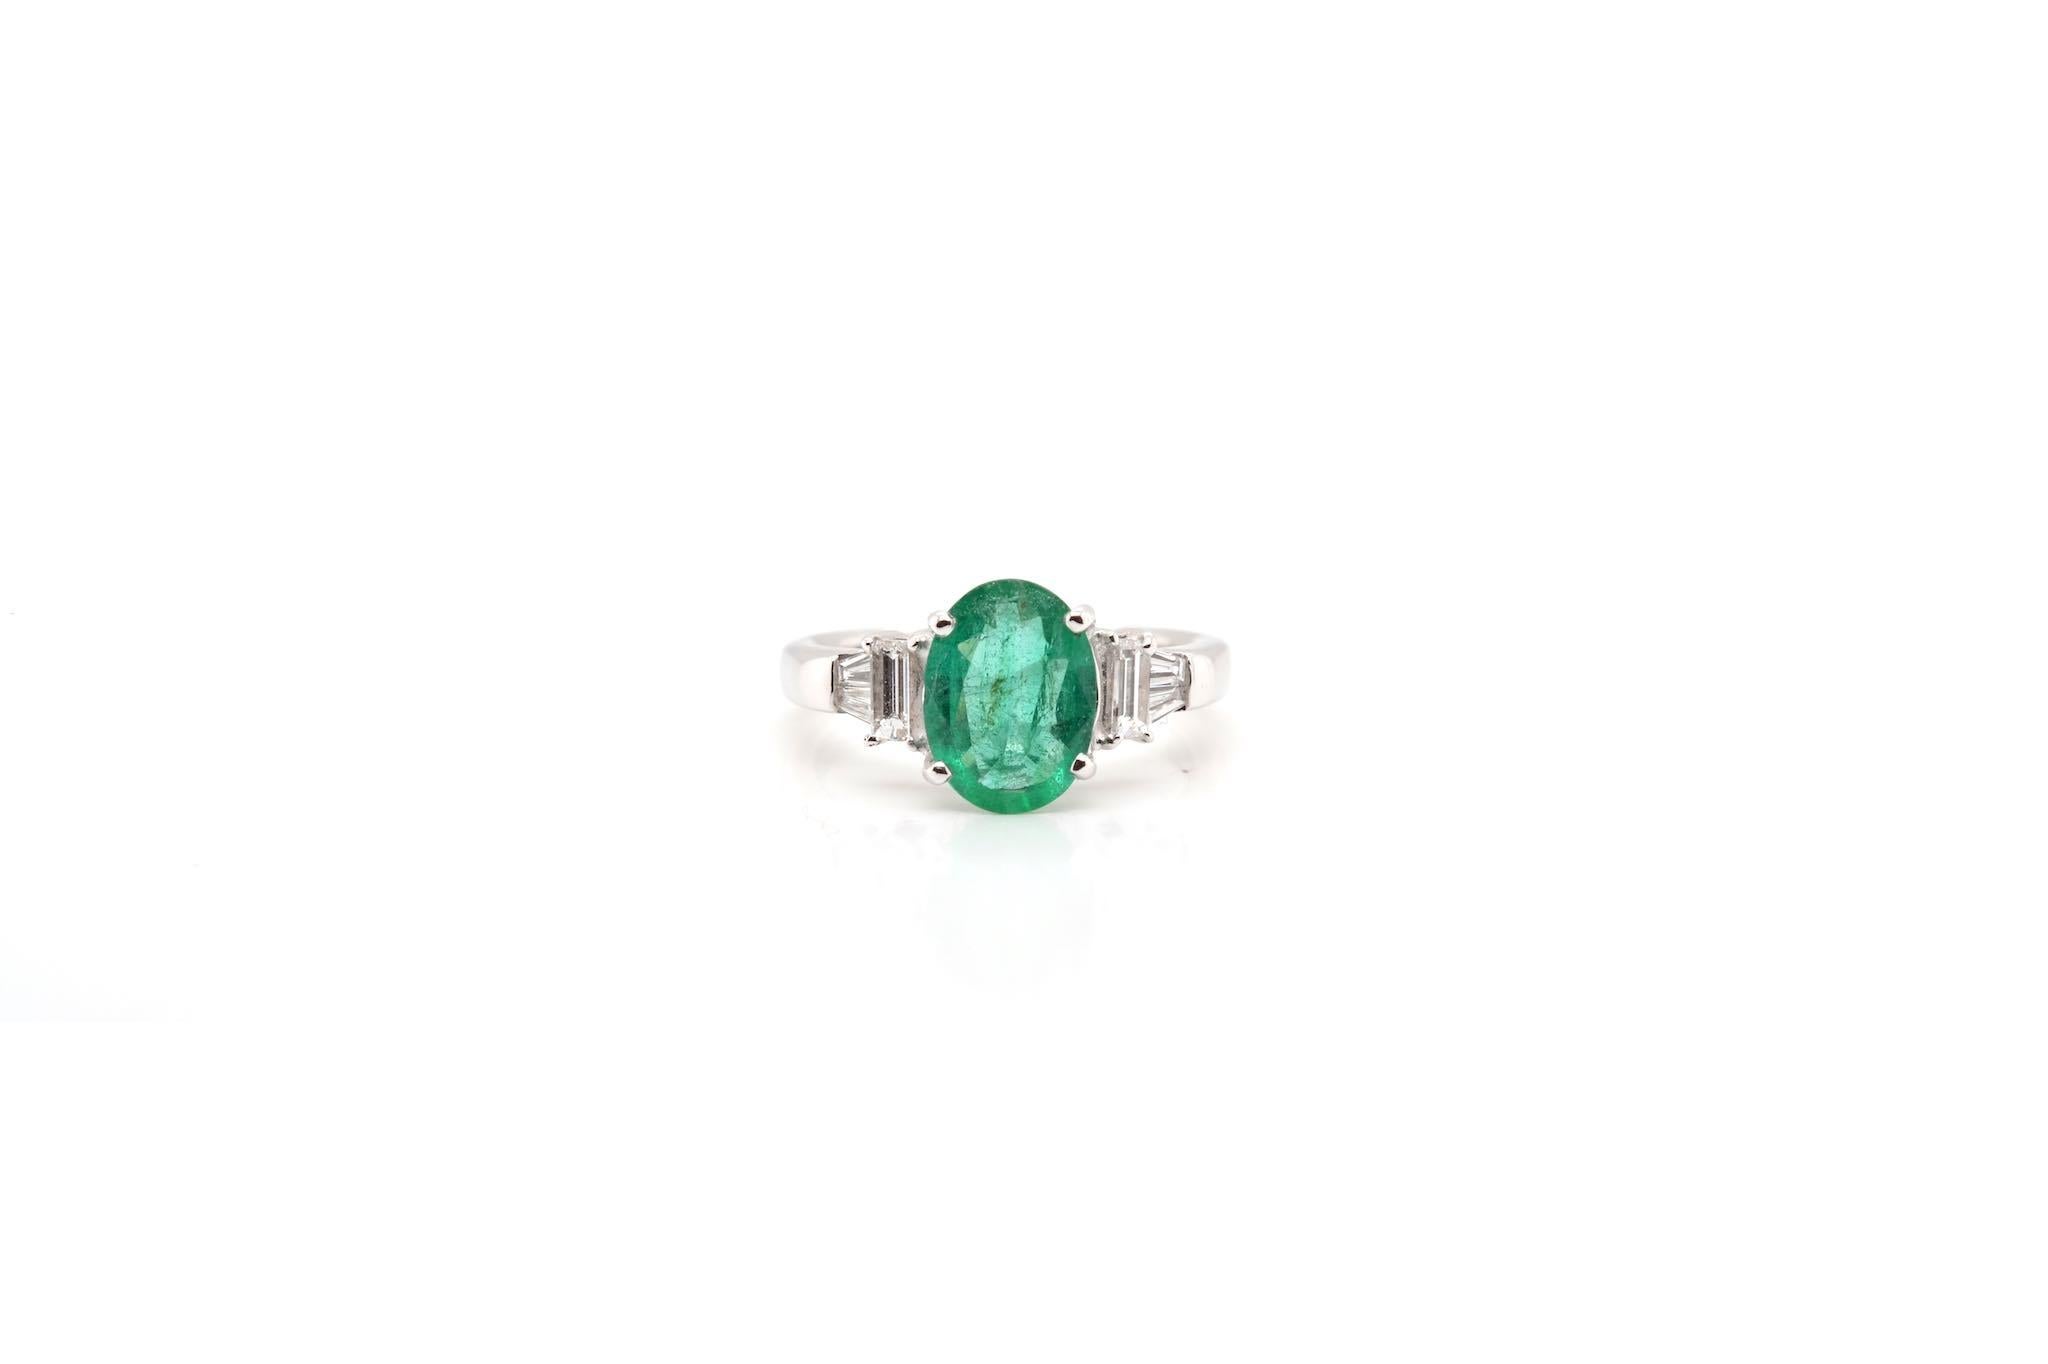 Stones: 2.92 carats oval emerald from Colombia
and baguette diamonds for a total weight of 0.40 carat.
Material: 18k white gold
Dimensions: 1 cm length on finger
Weight: 4.6g
Size: 51.5 (free sizing)
Certificate
Ref. : 23374 / 23495